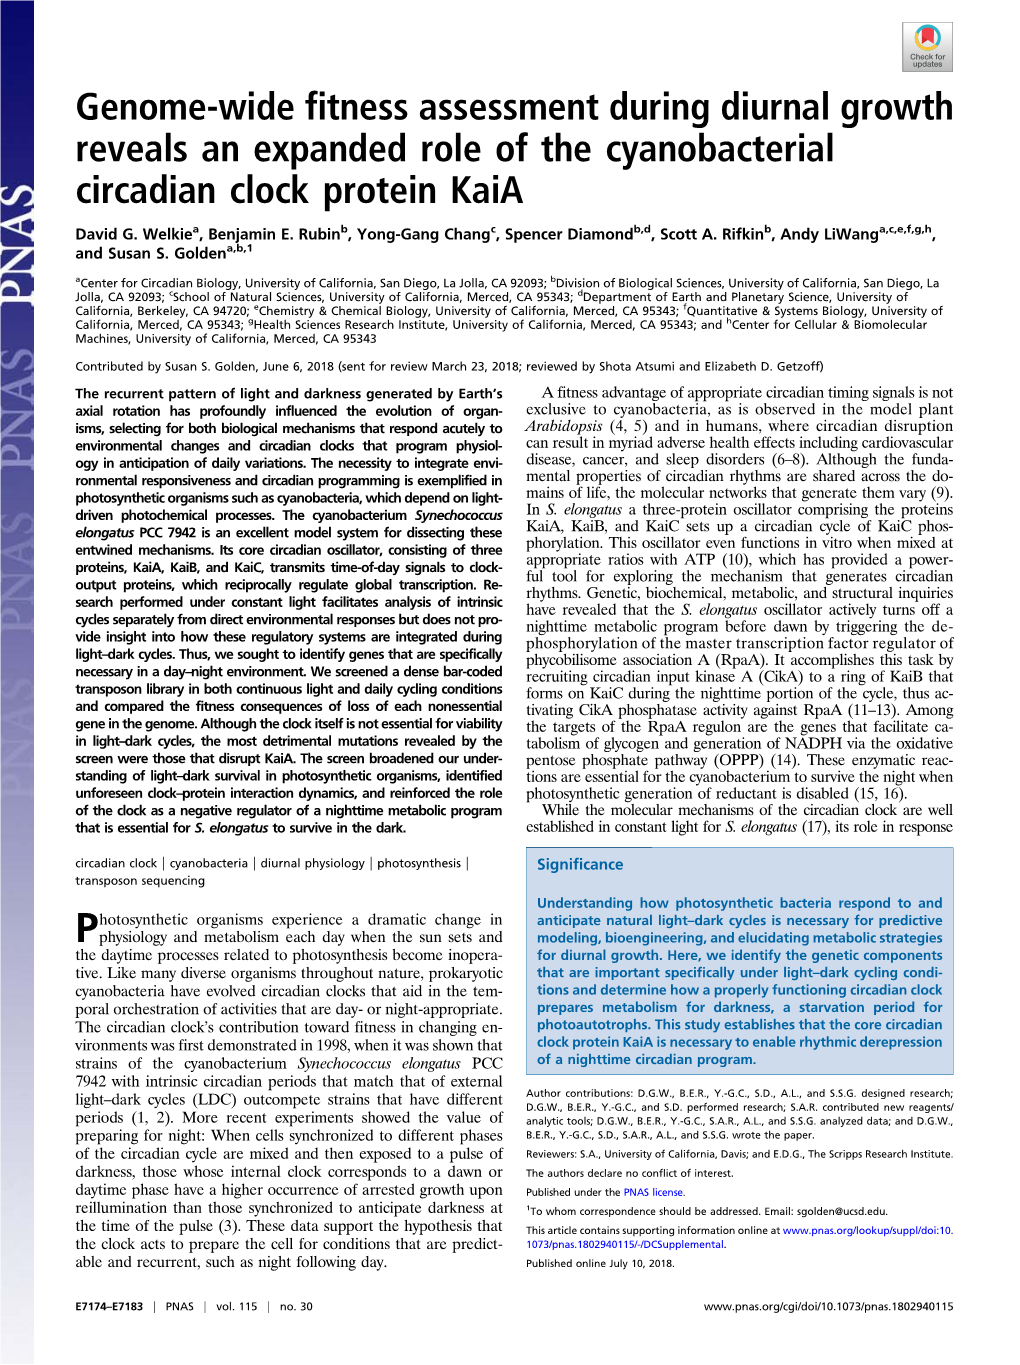 Genome-Wide Fitness Assessment During Diurnal Growth Reveals an Expanded Role of the Cyanobacterial Circadian Clock Protein Kaia